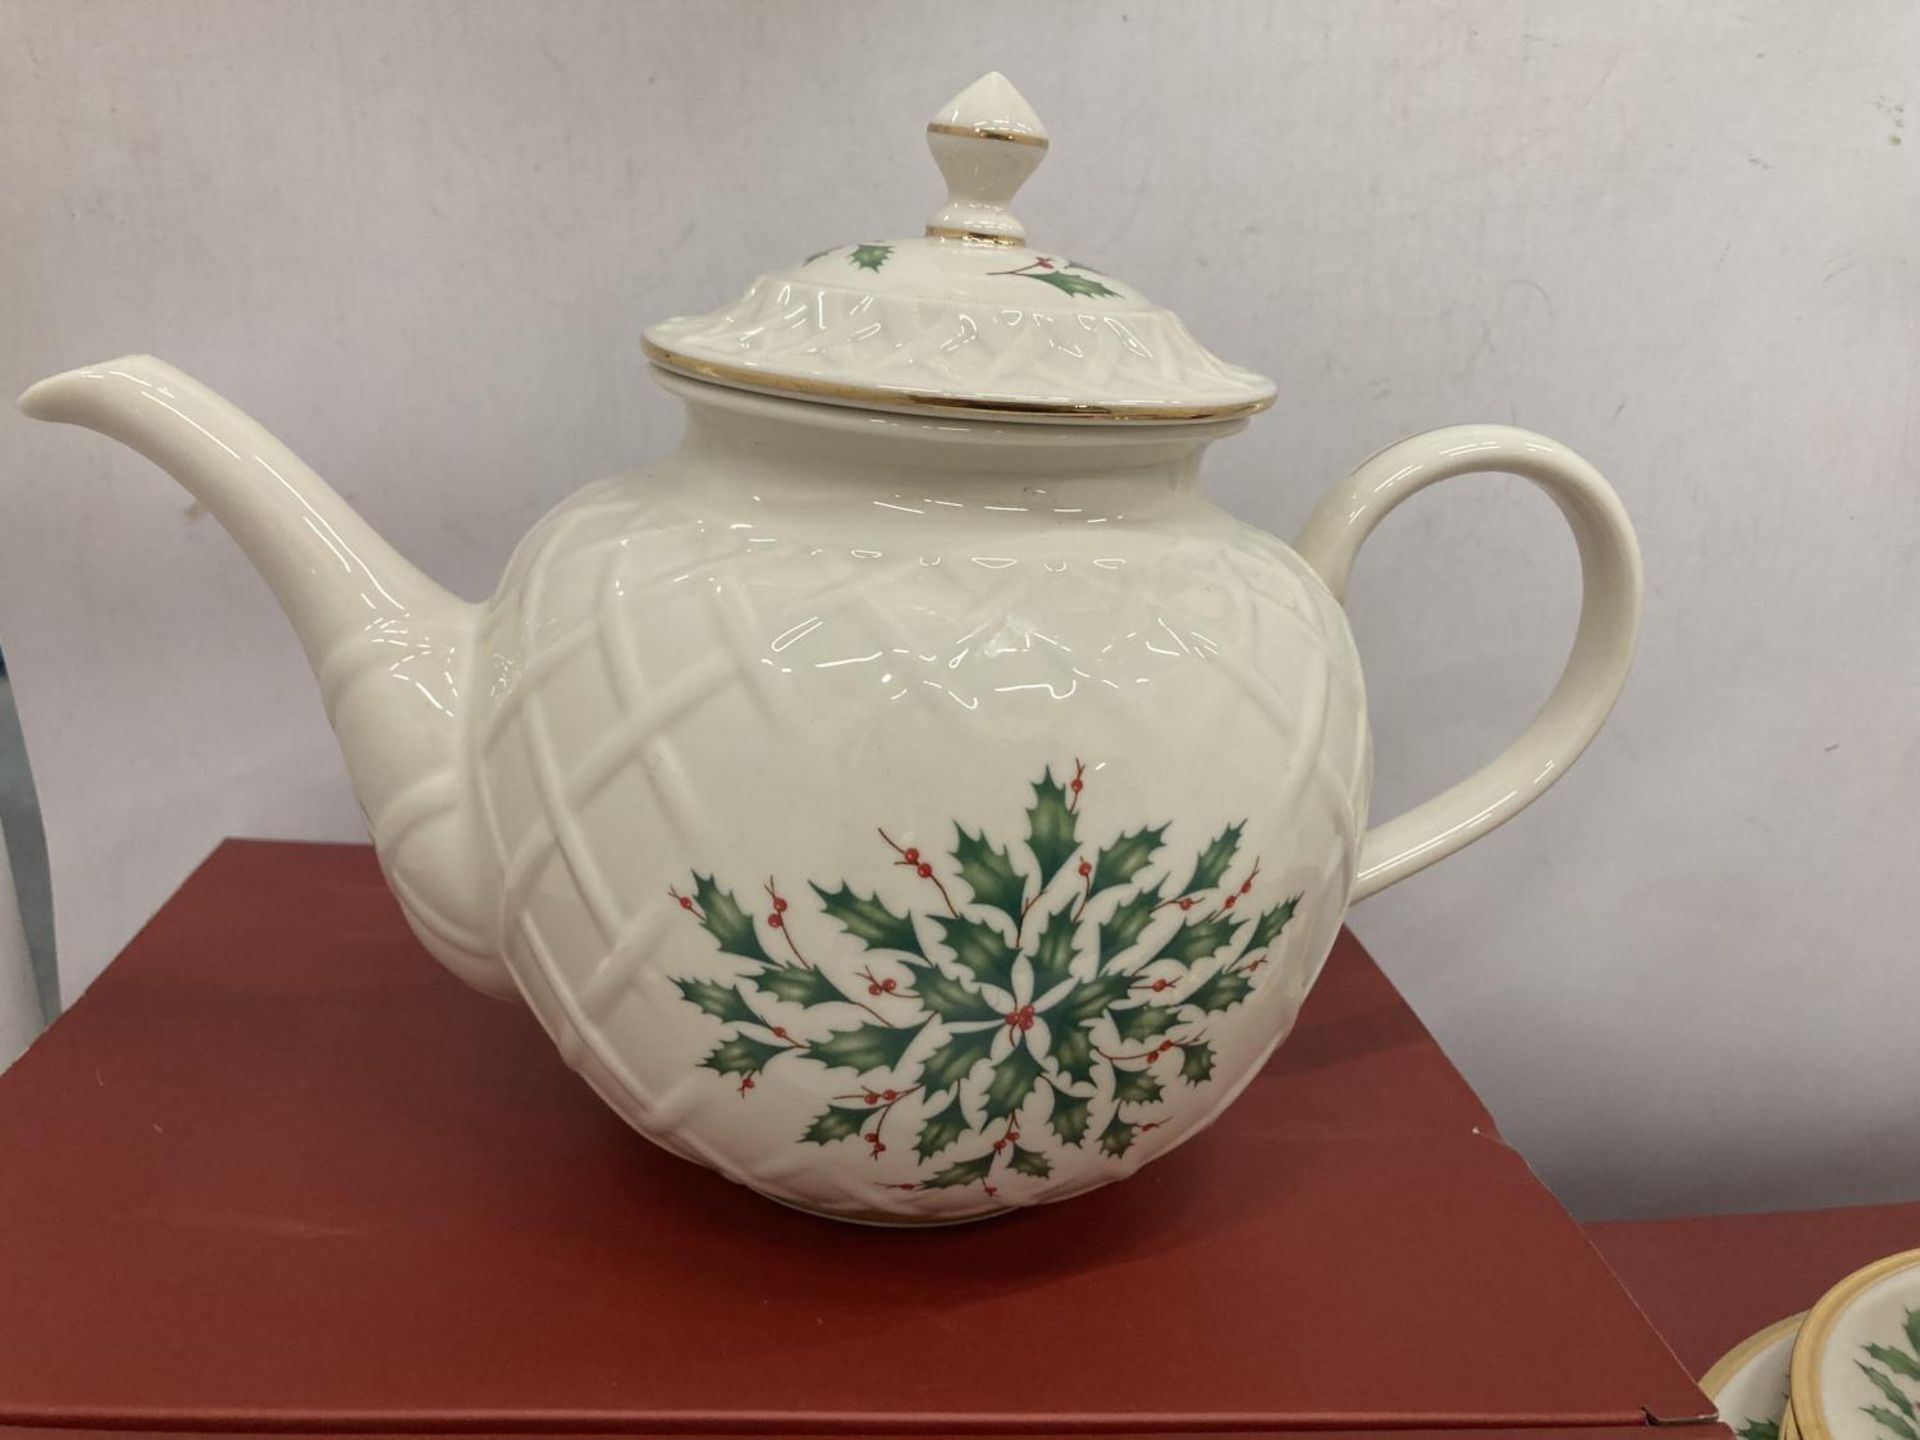 A LENNOX 'HOLIDAY' TEAPOT AS NEW IN BOX PLUS A LENNOX QUAD SET 'HOLIDAY' AS NEW IN BOX - Image 2 of 4